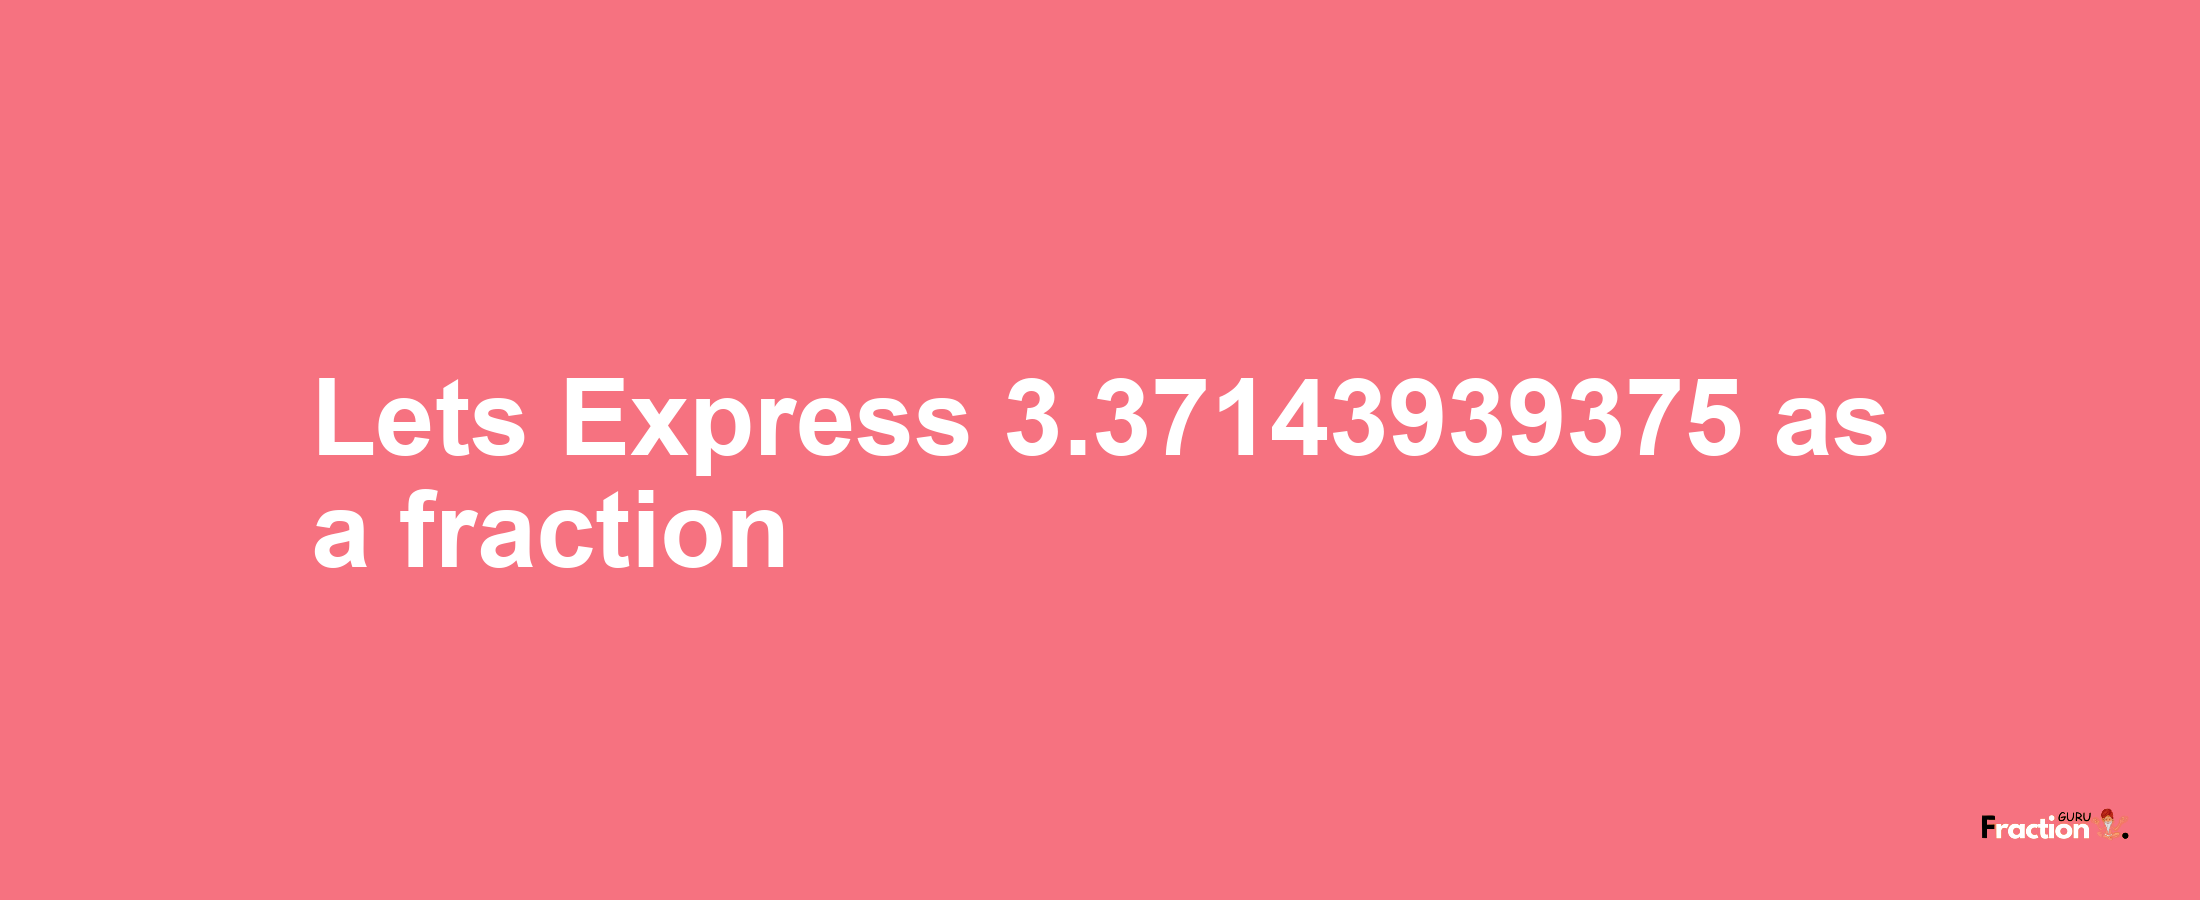 Lets Express 3.37143939375 as afraction